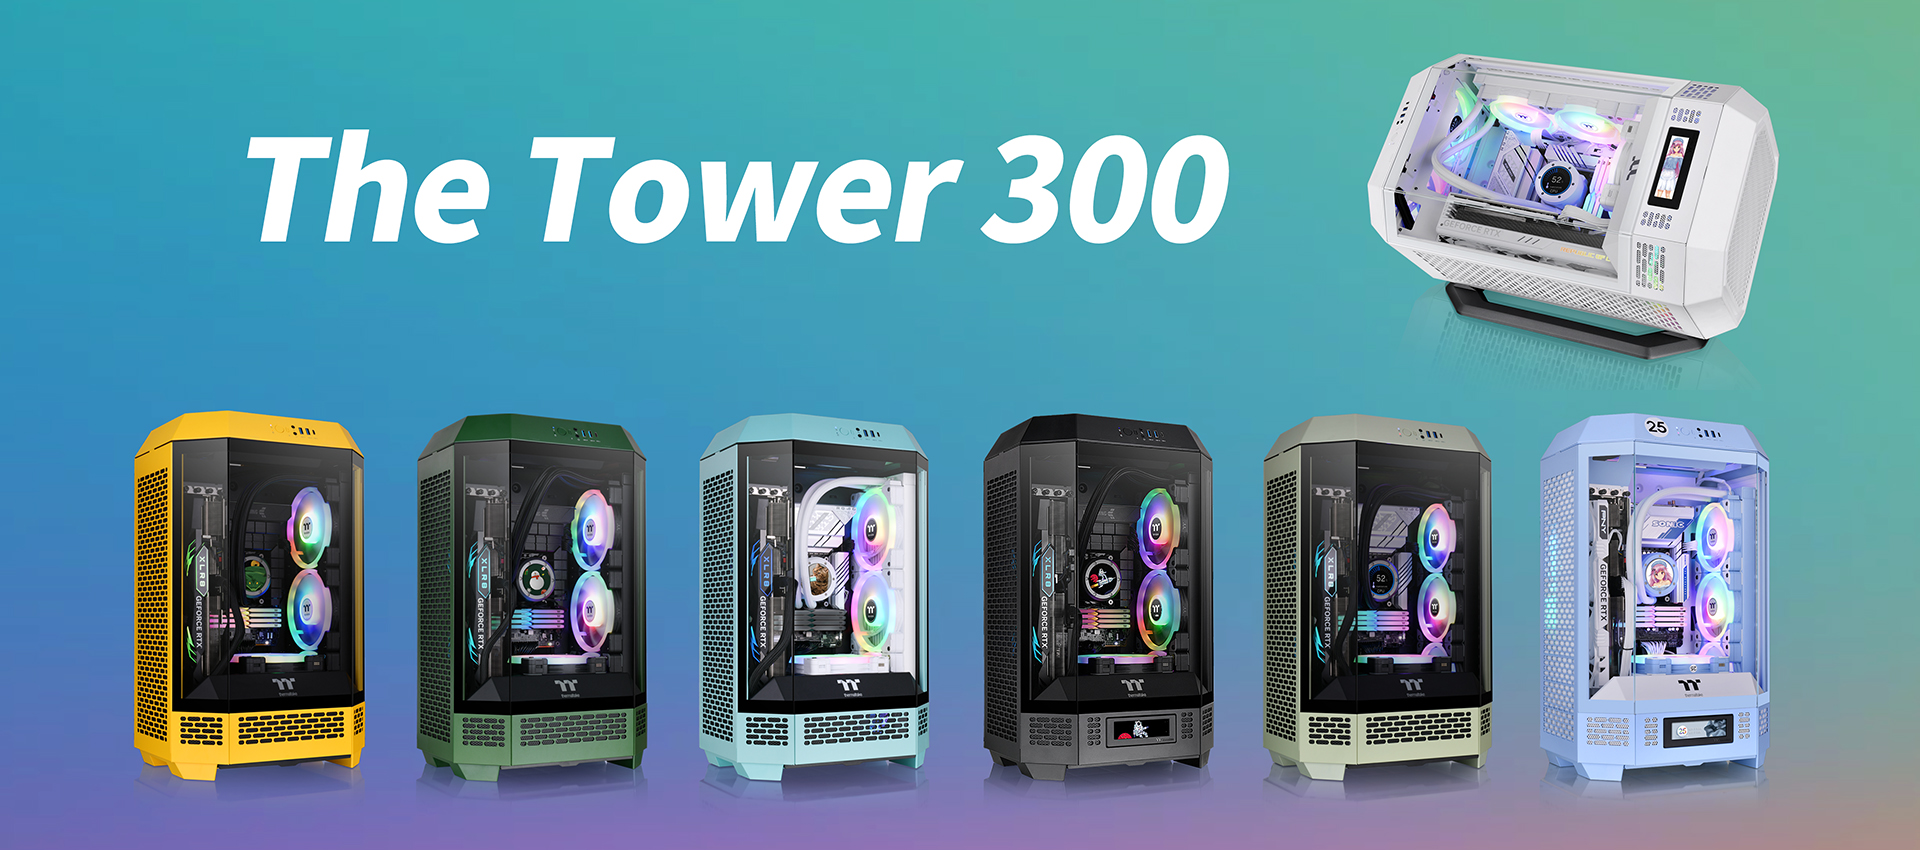 The Tower 300